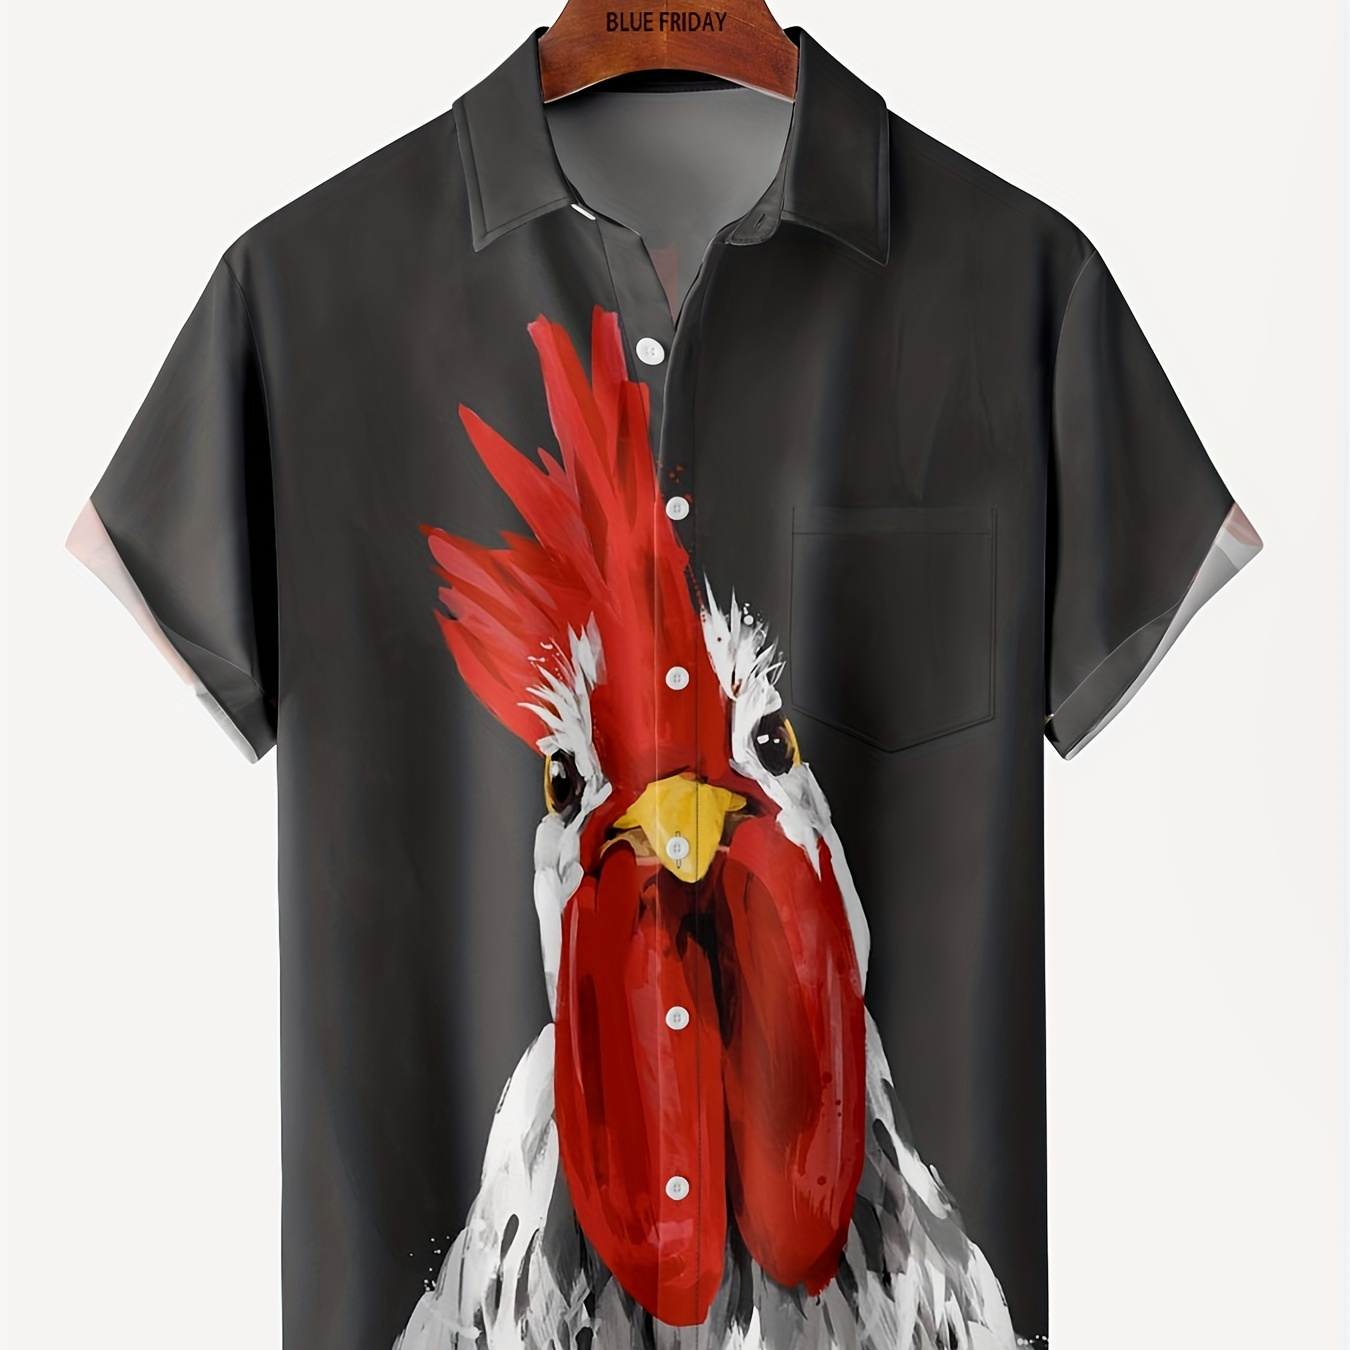 Plus Size Men's Rooster Short Sleeve Shirts Tops Summer Comfy